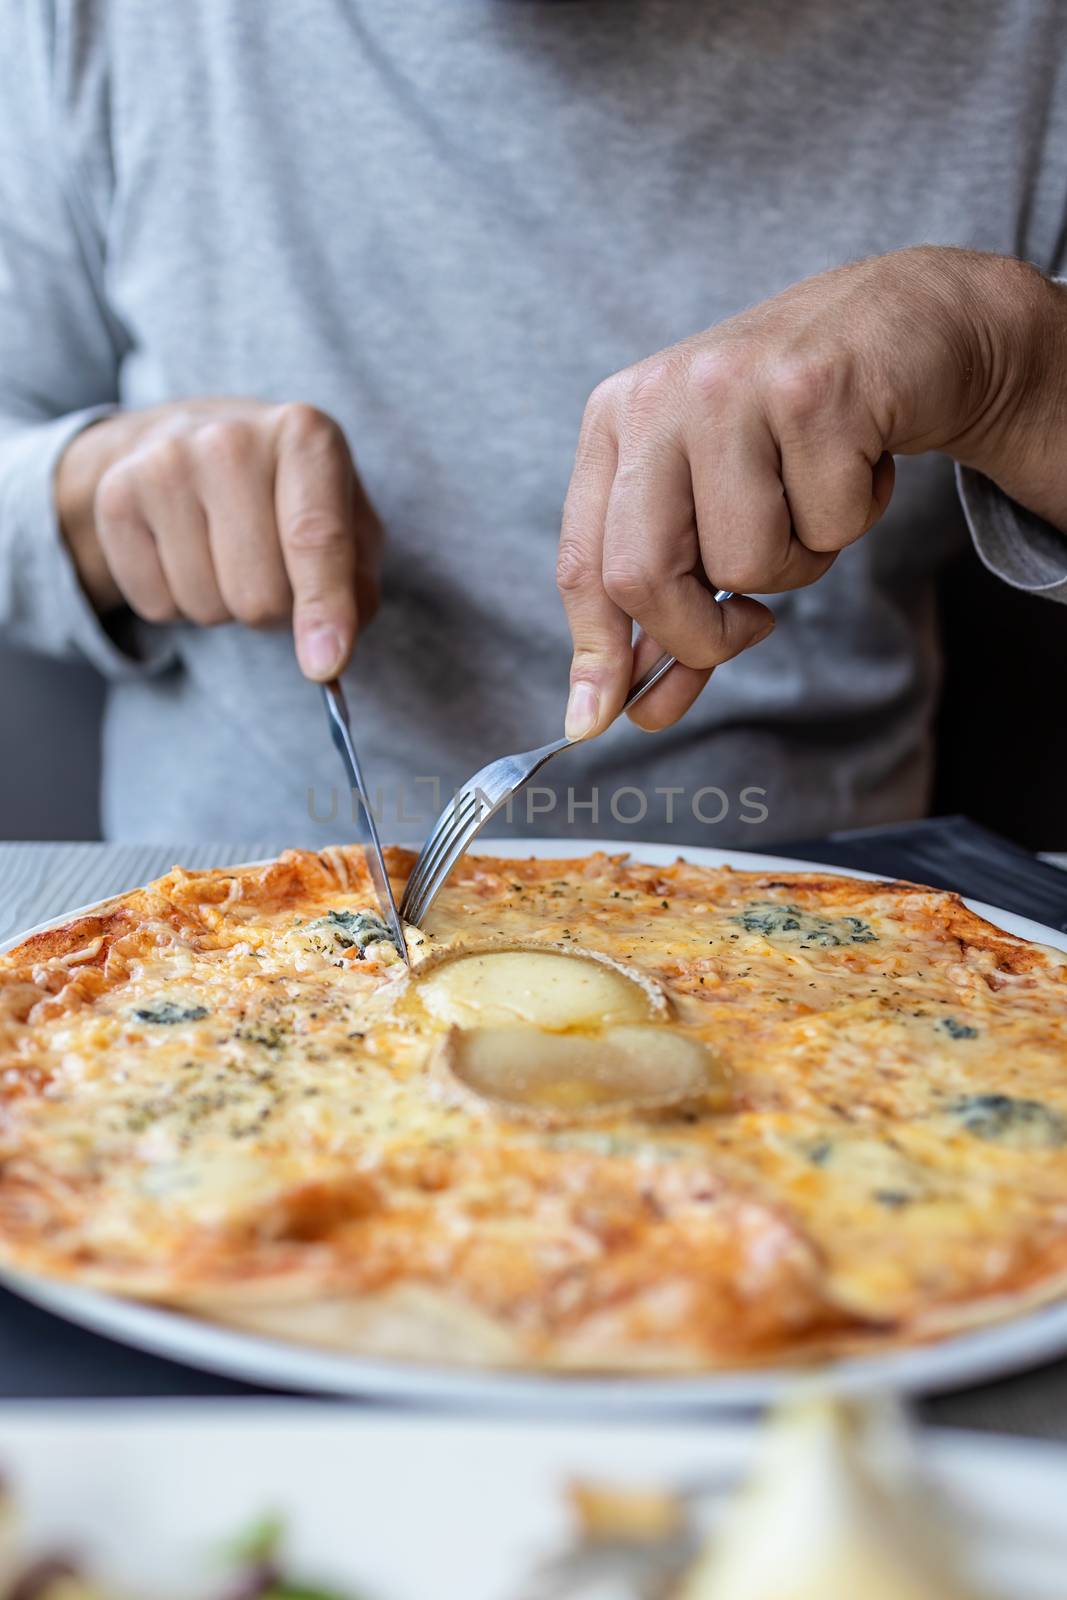 Man eating delicious cheesy pizza in the restaurant with fork and knife